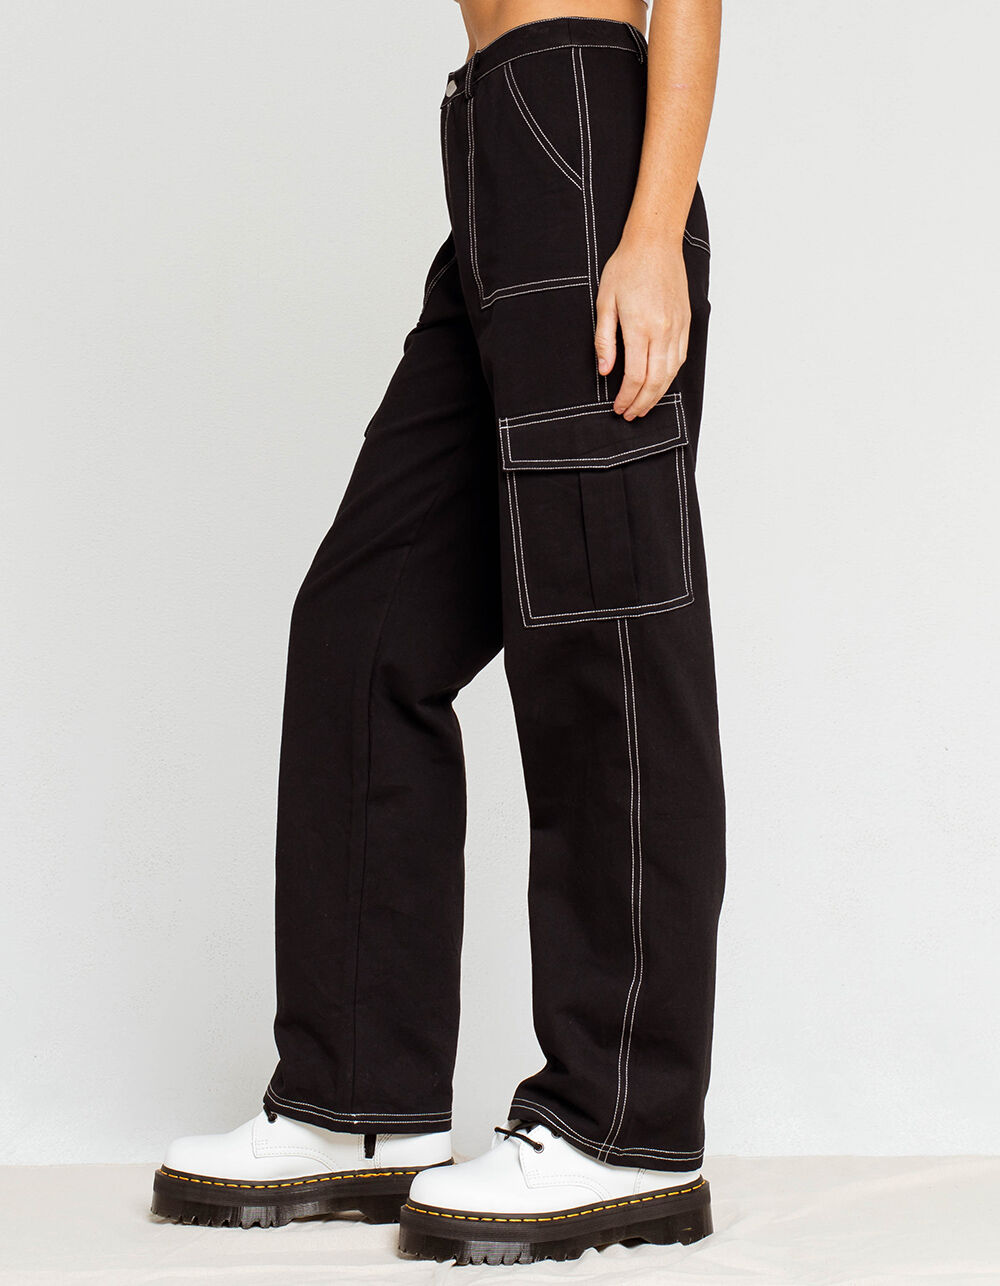 Pull&Bear Cargo Trousers outlet - 1800 products on sale | FASHIOLA.co.uk